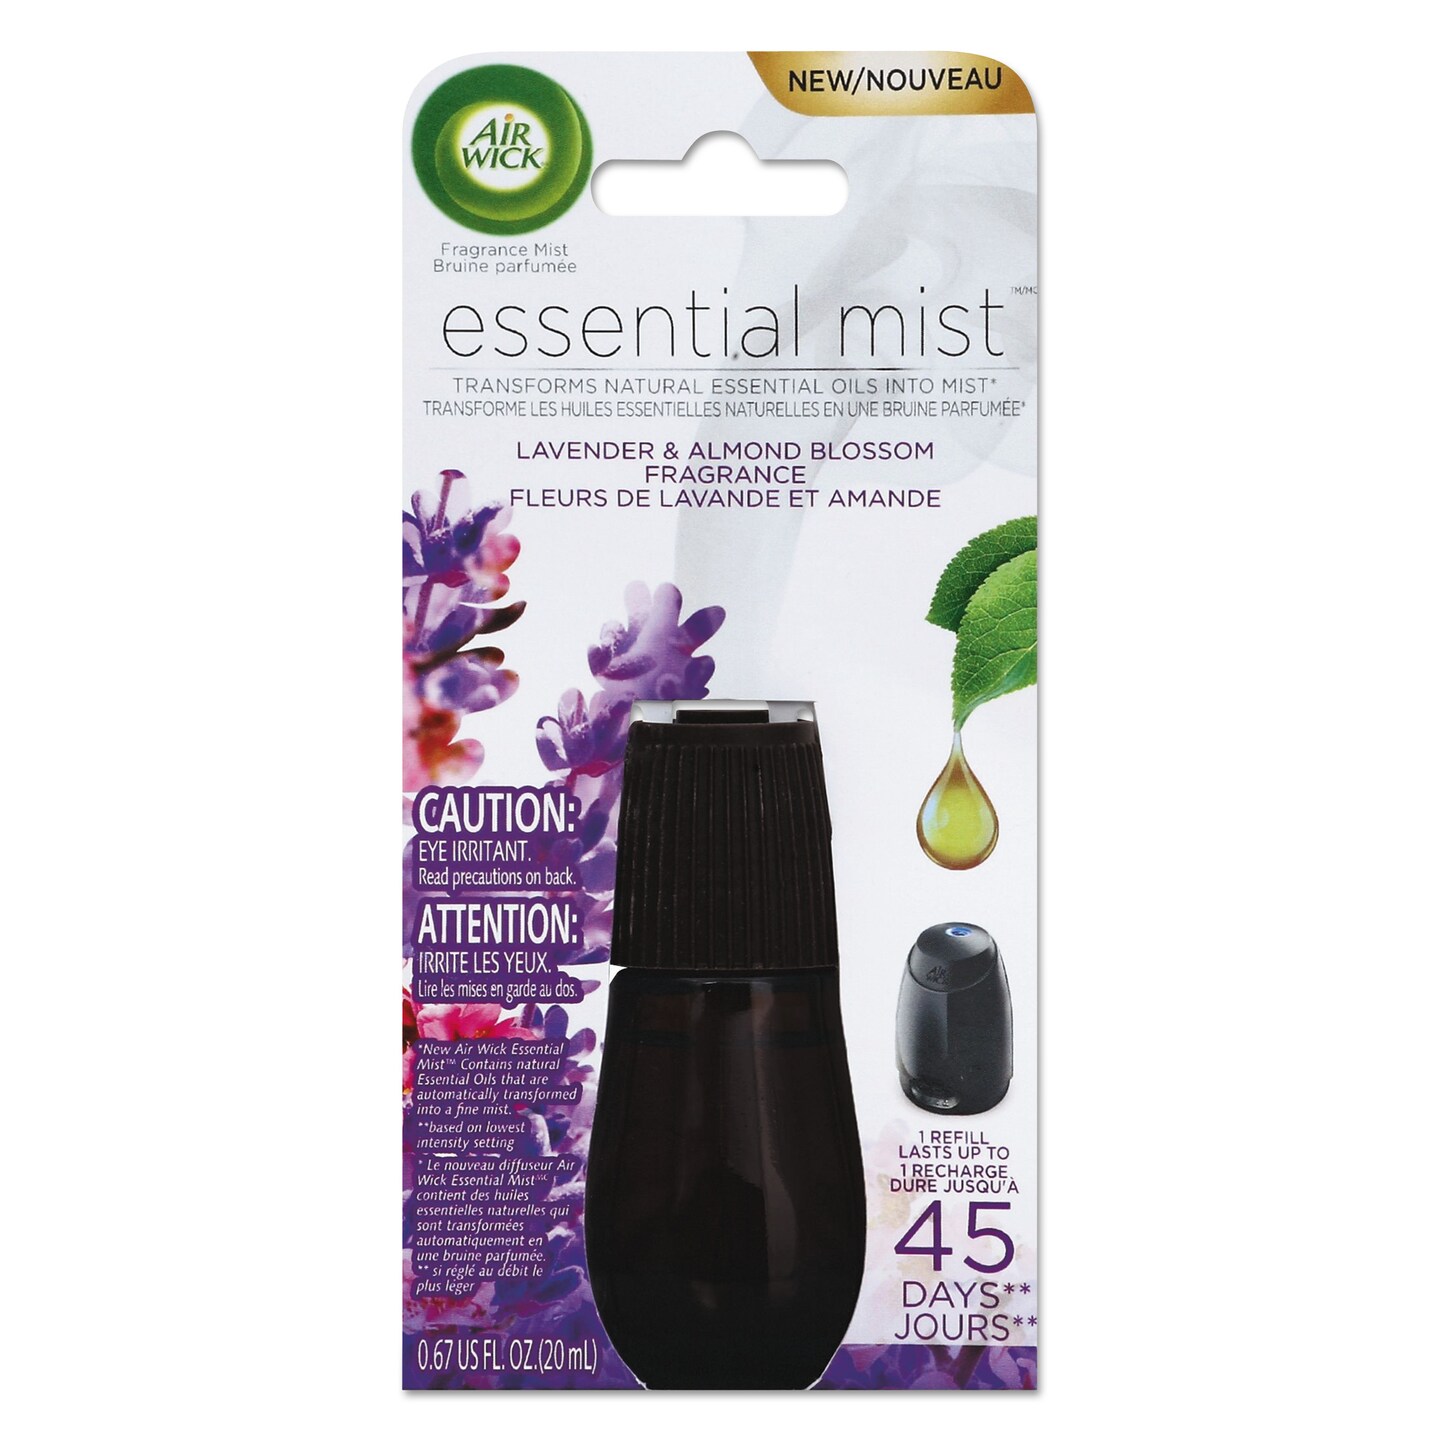 Air Wick Essential Mist Essential Oil Refill Lavender and Almond Blossom